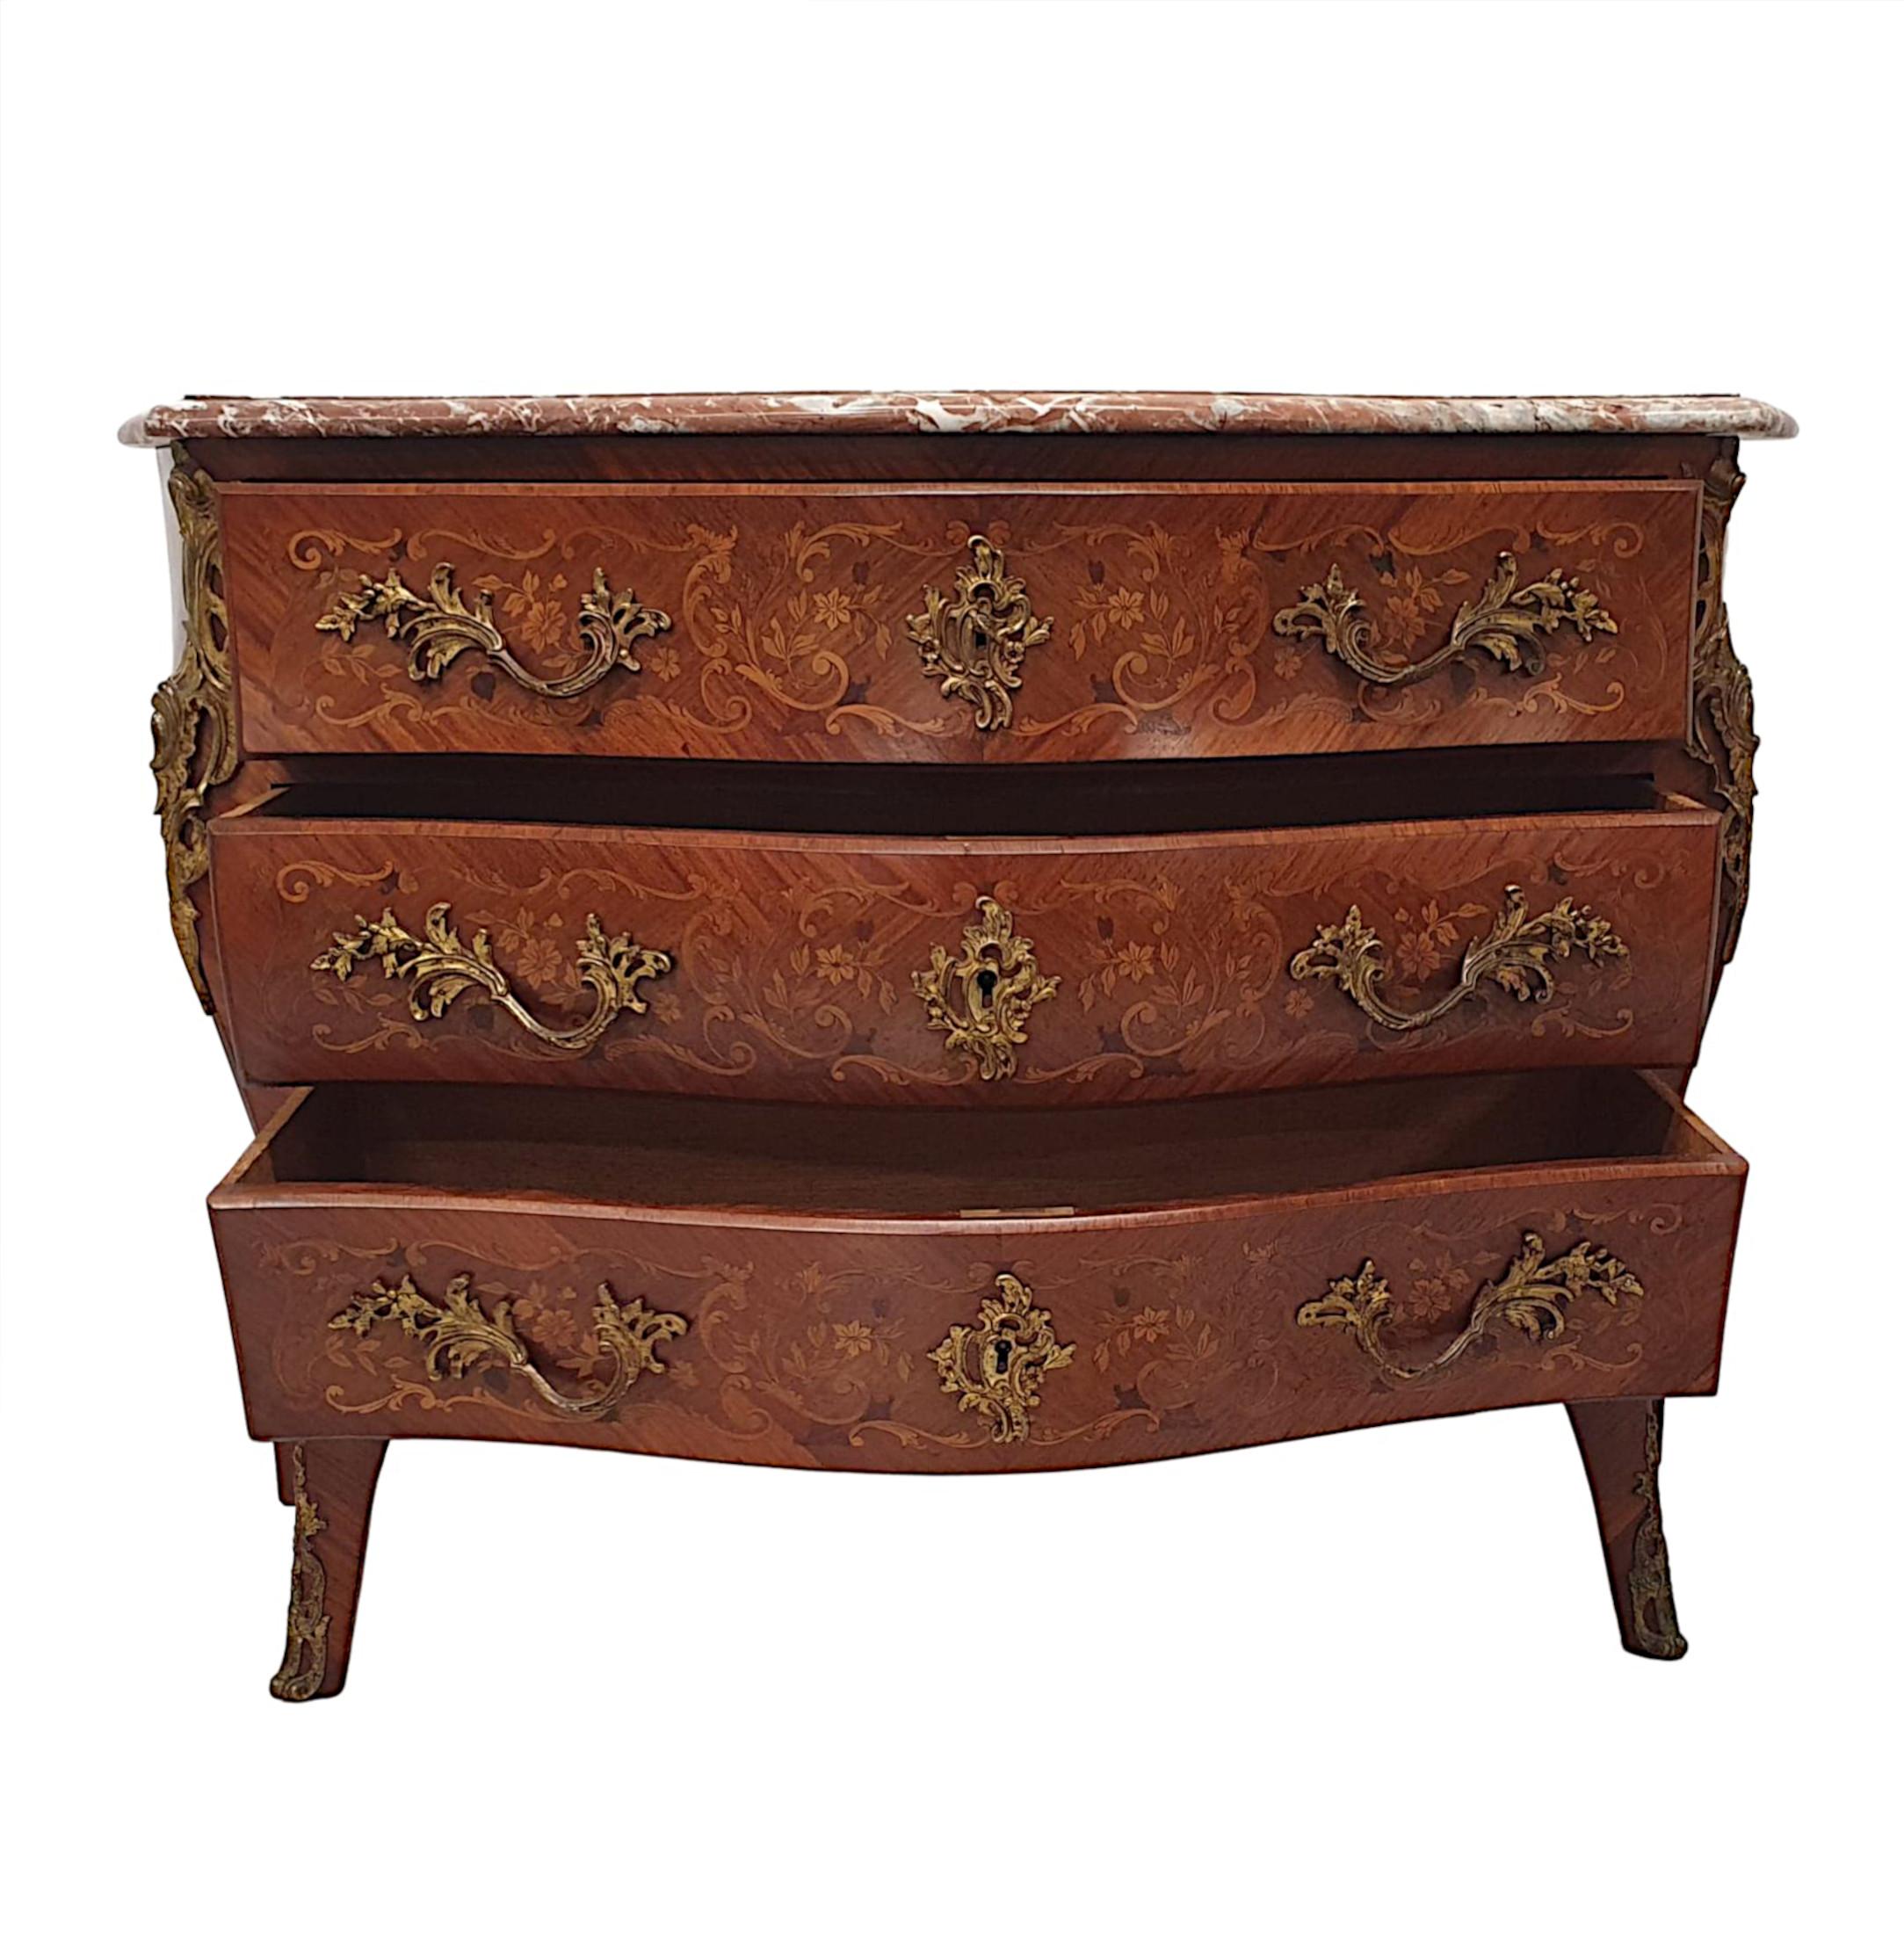 Ormolu Very Fine 19th Century Marquetry Inlaid Marble Top Chest of Drawers For Sale